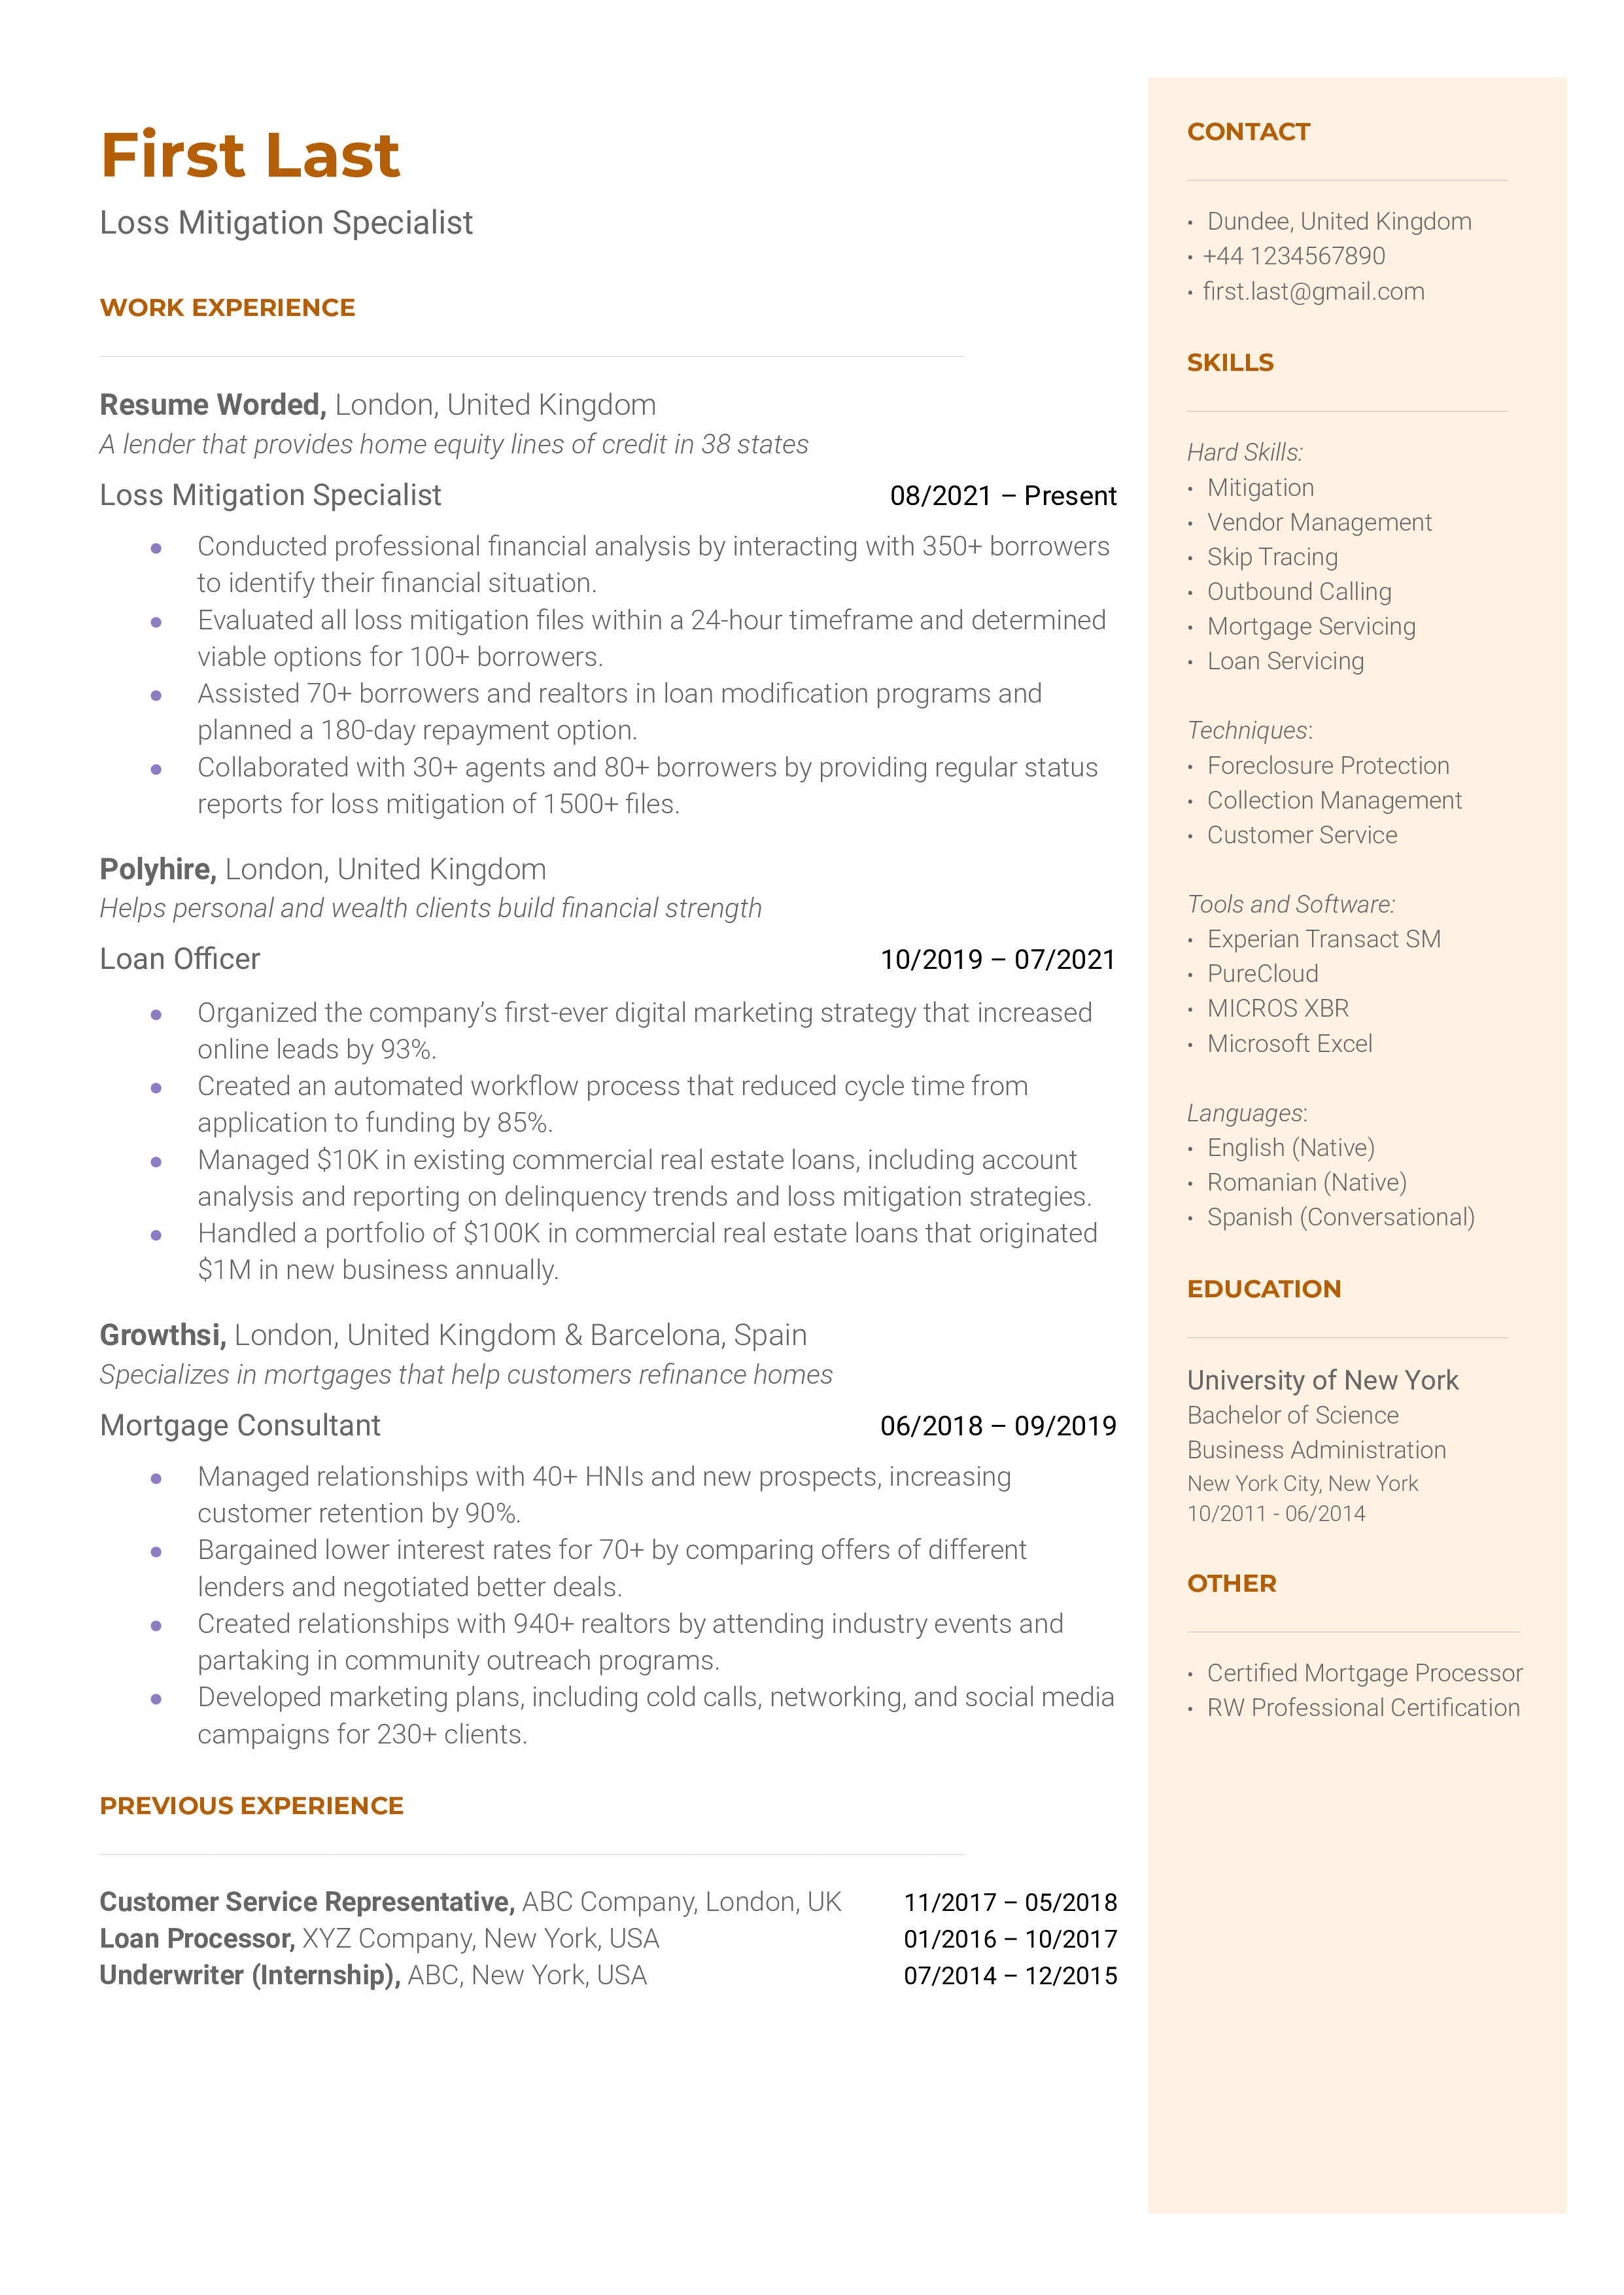 A loss mitigation specialist resume template emphasizing hard skills.